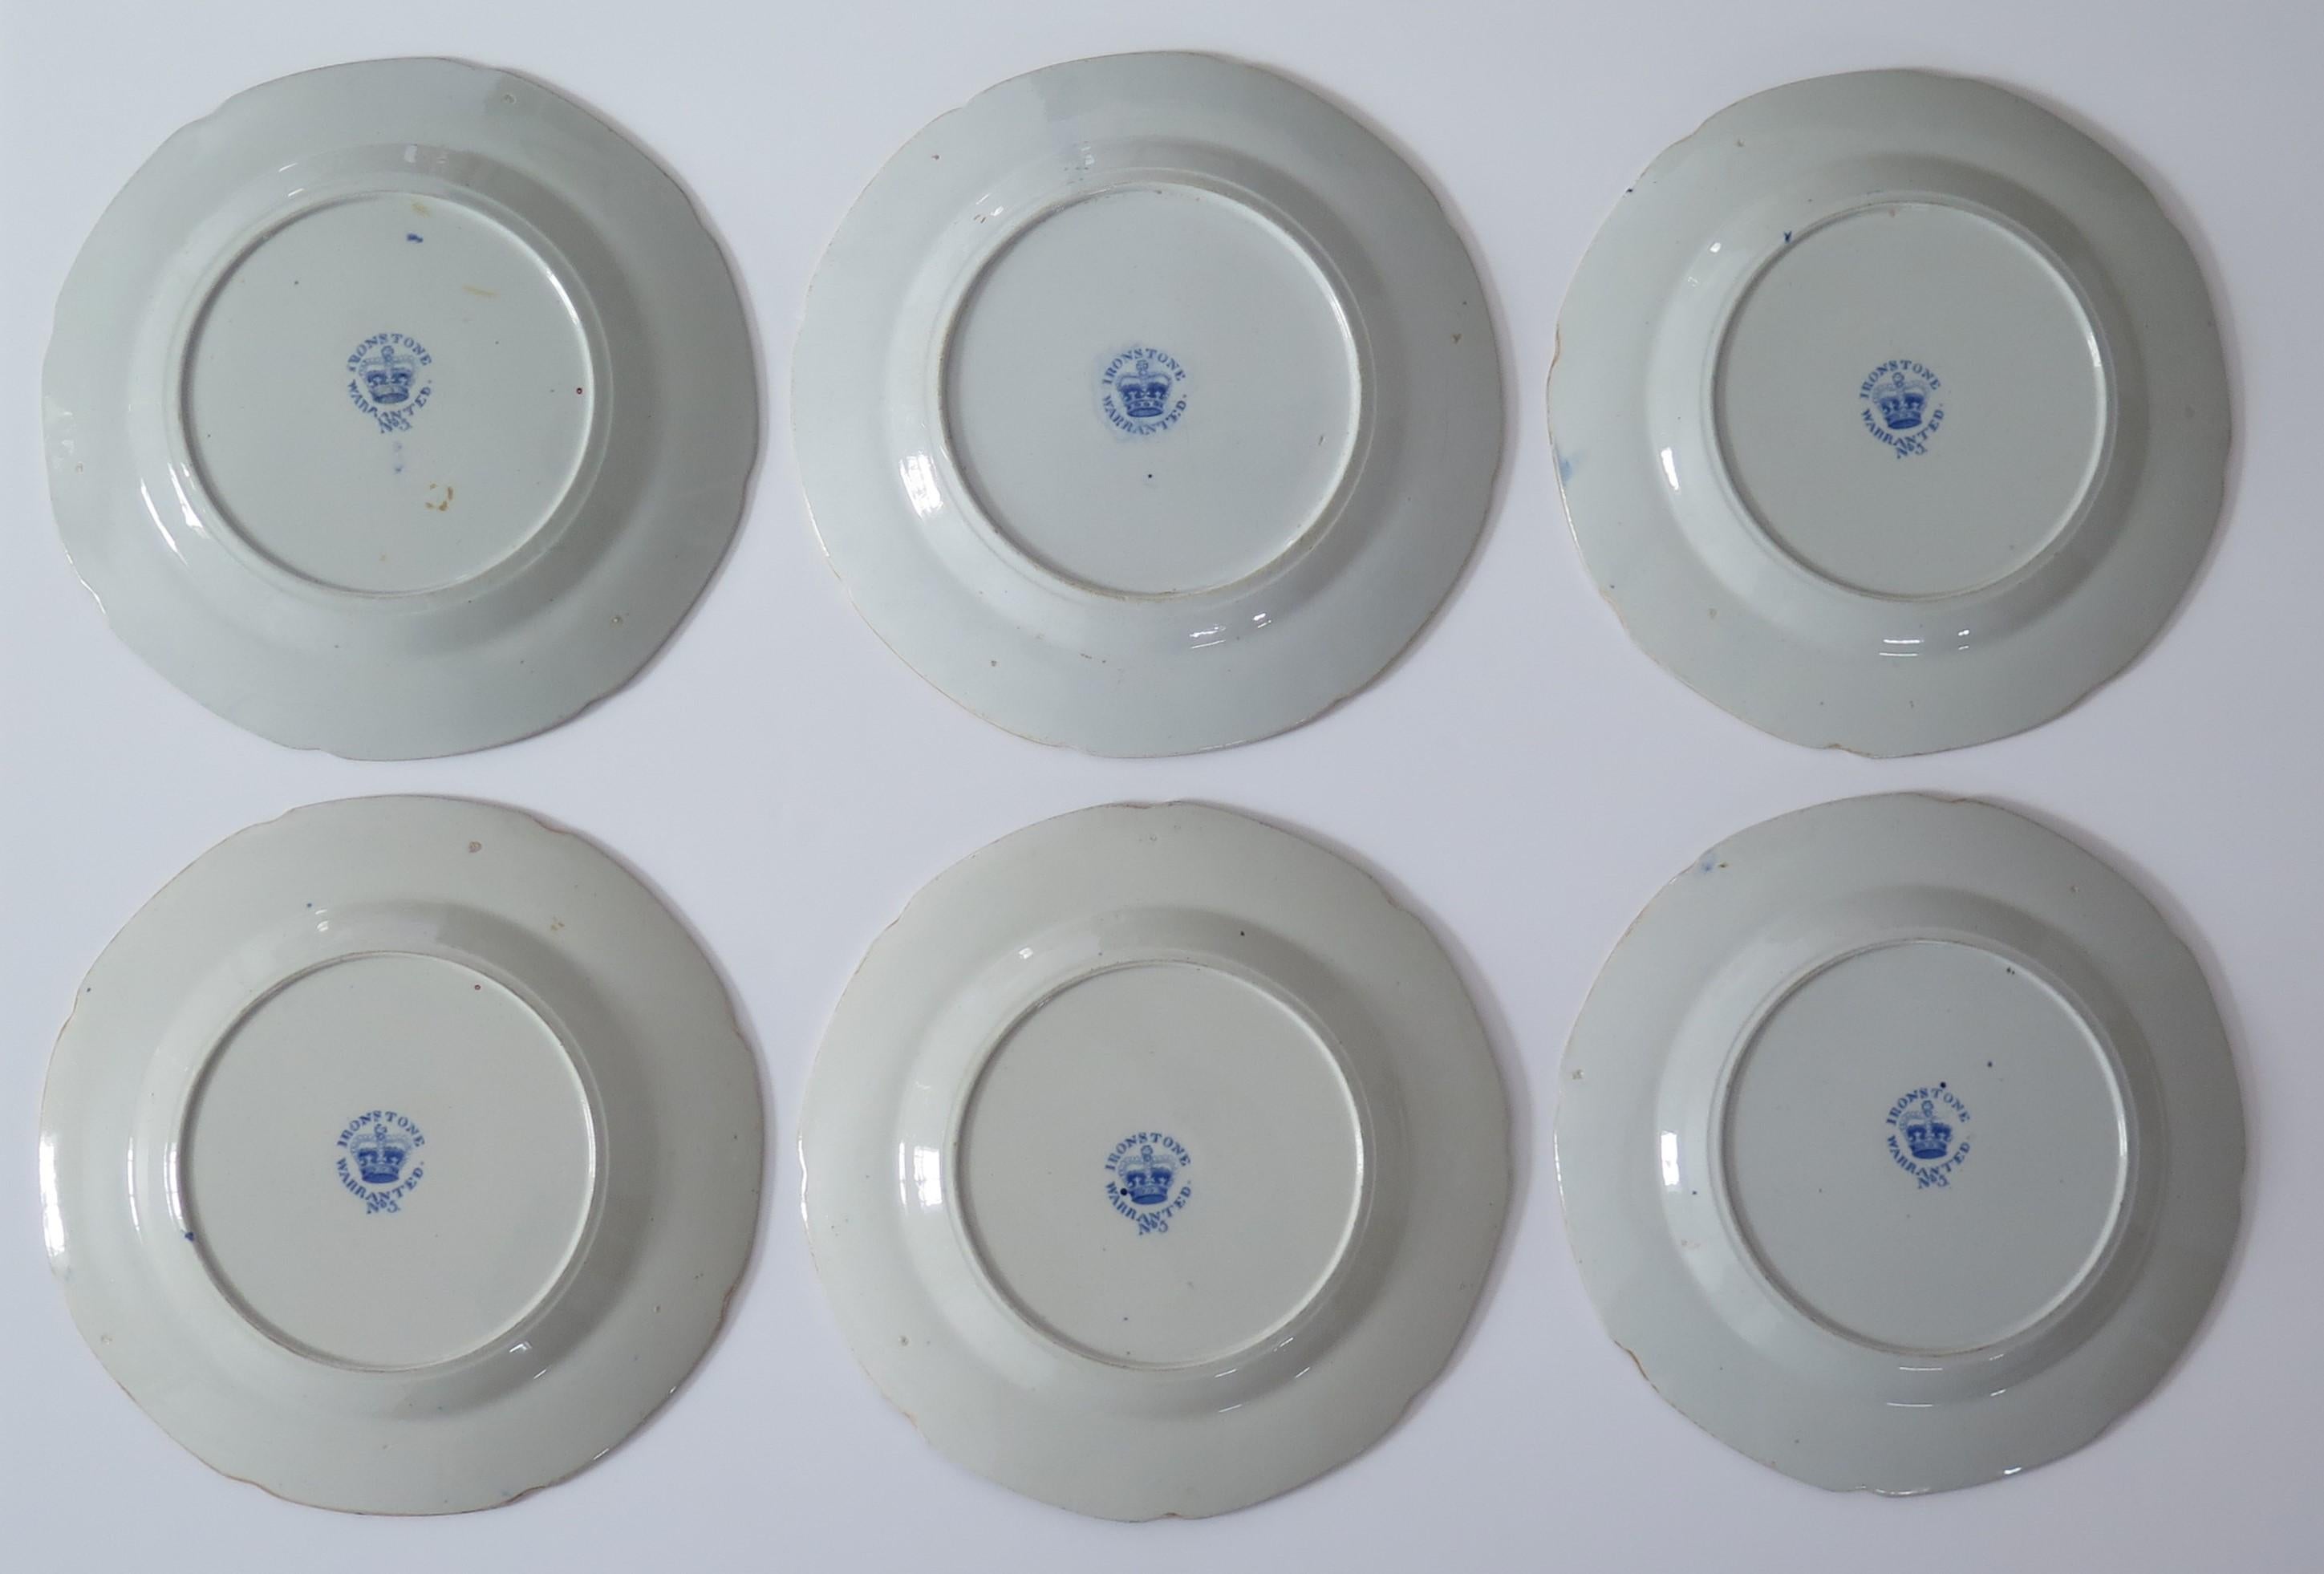 SIX Georgian Hicks & Meigh Ironstone Dinner Plates Water Lily Ptn No.5, Ca 1815 For Sale 2